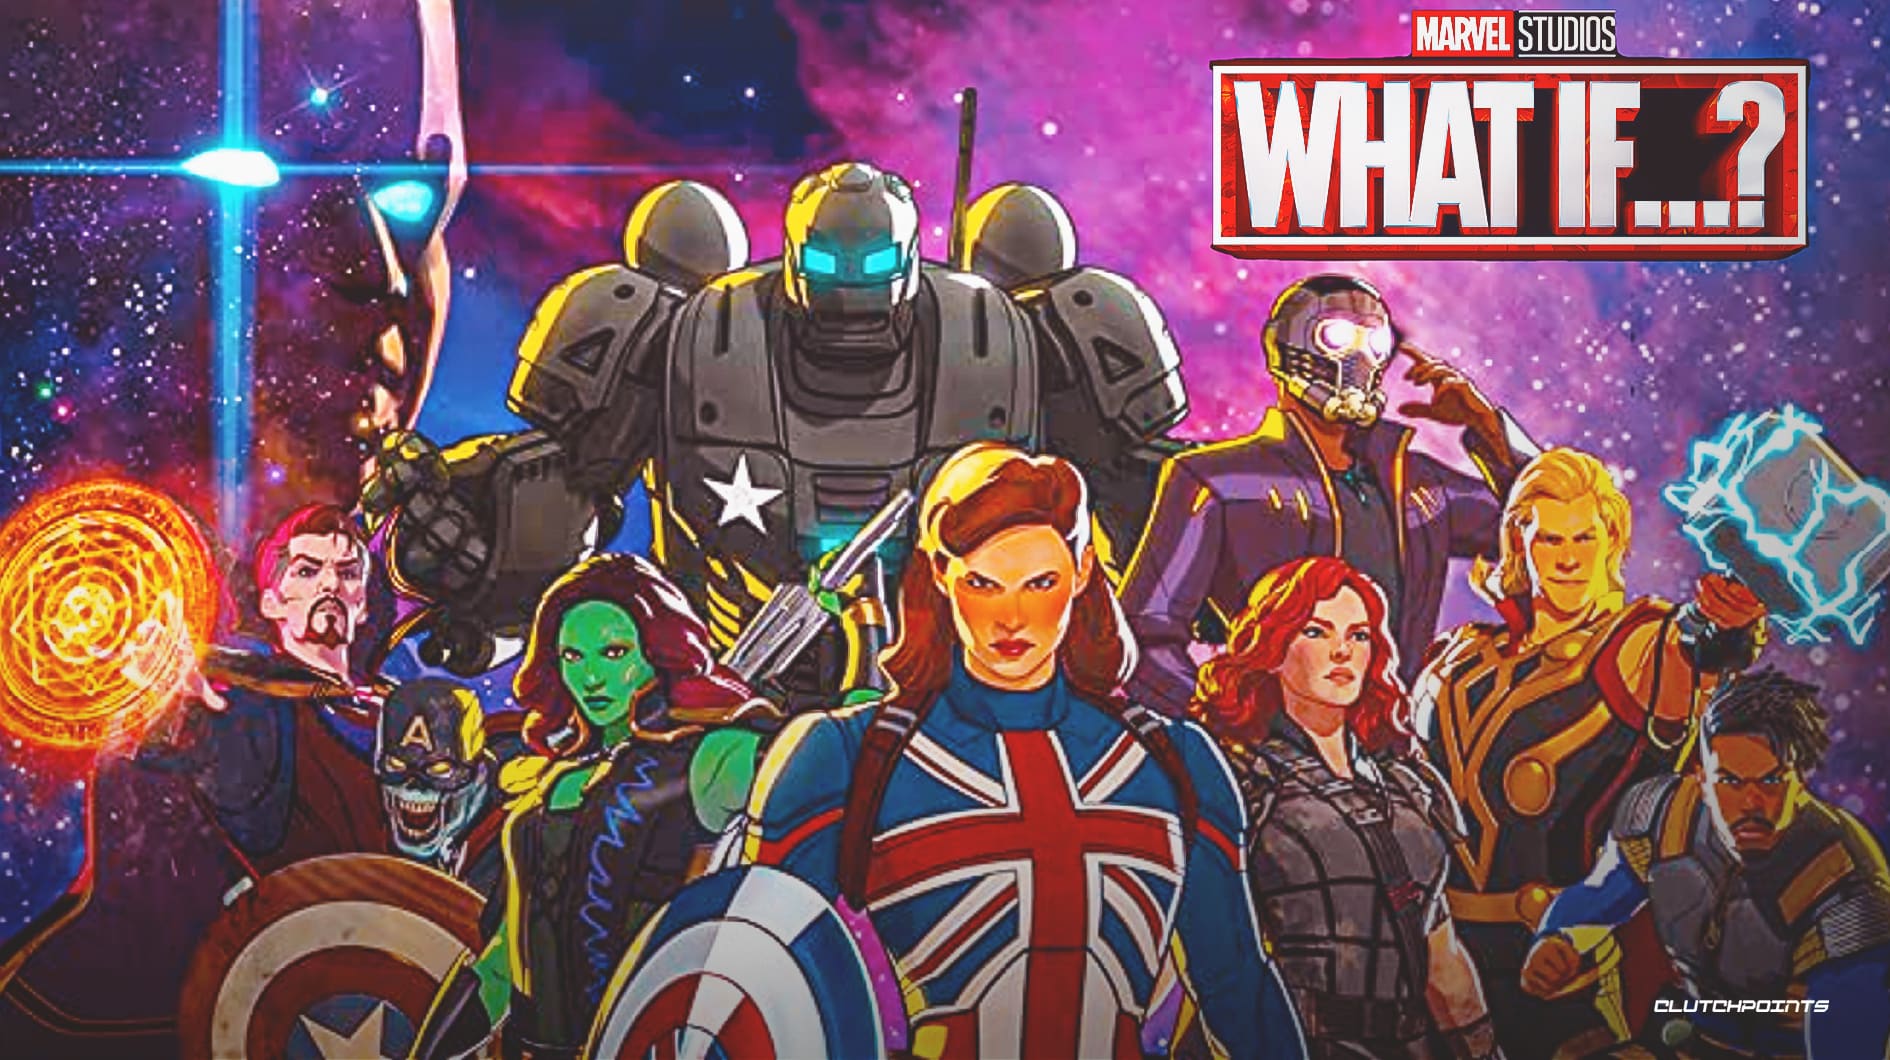 Marvel's 'What If...?' Announces The First Three Episode Titles -  MickeyBlog.com